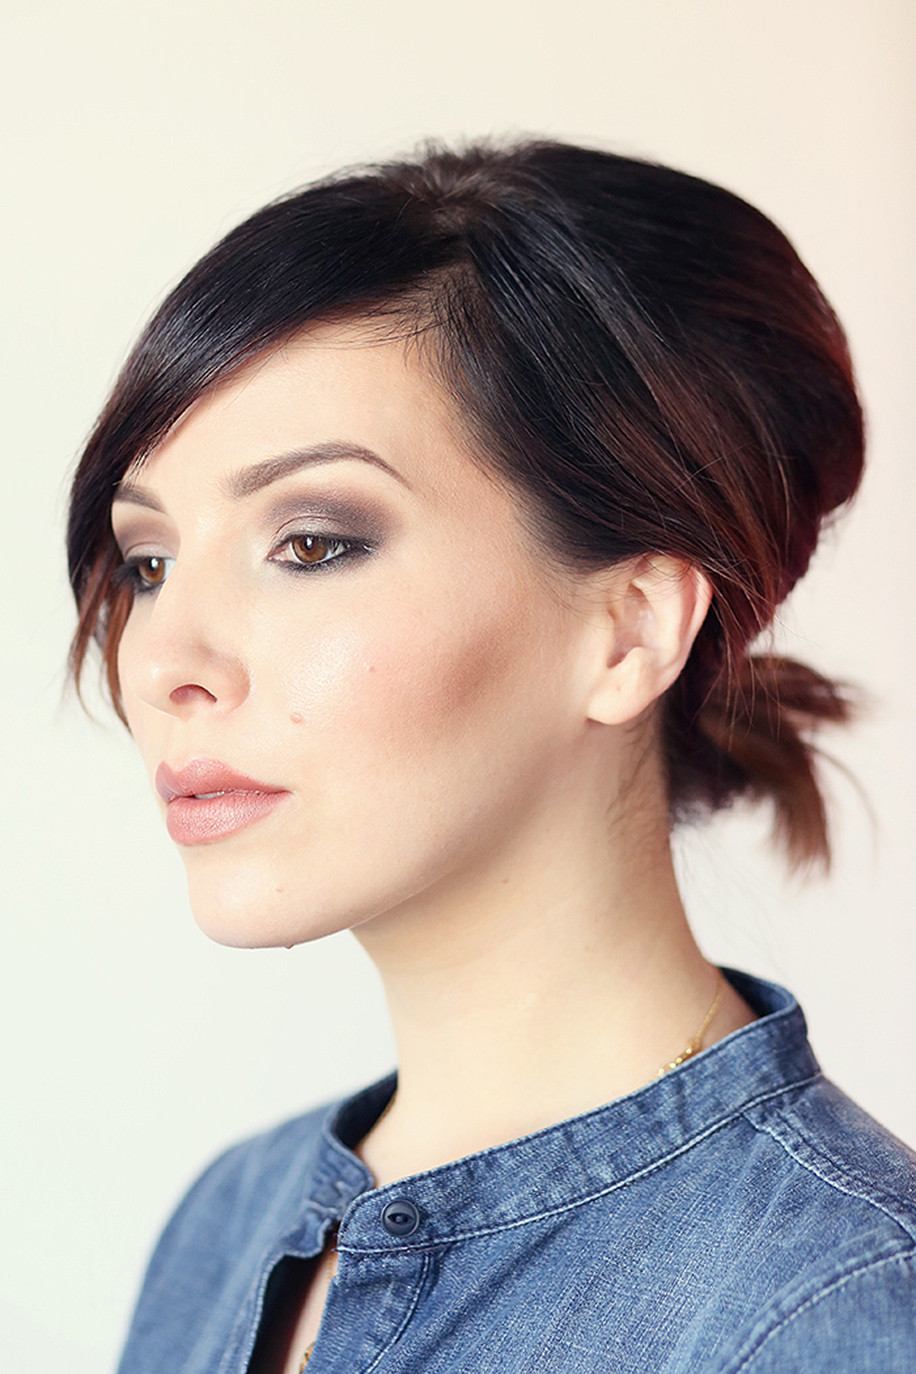 Cute Short Hairstyles
 Cute Short Hairstyles to Step Up Your Hair Game Big Time